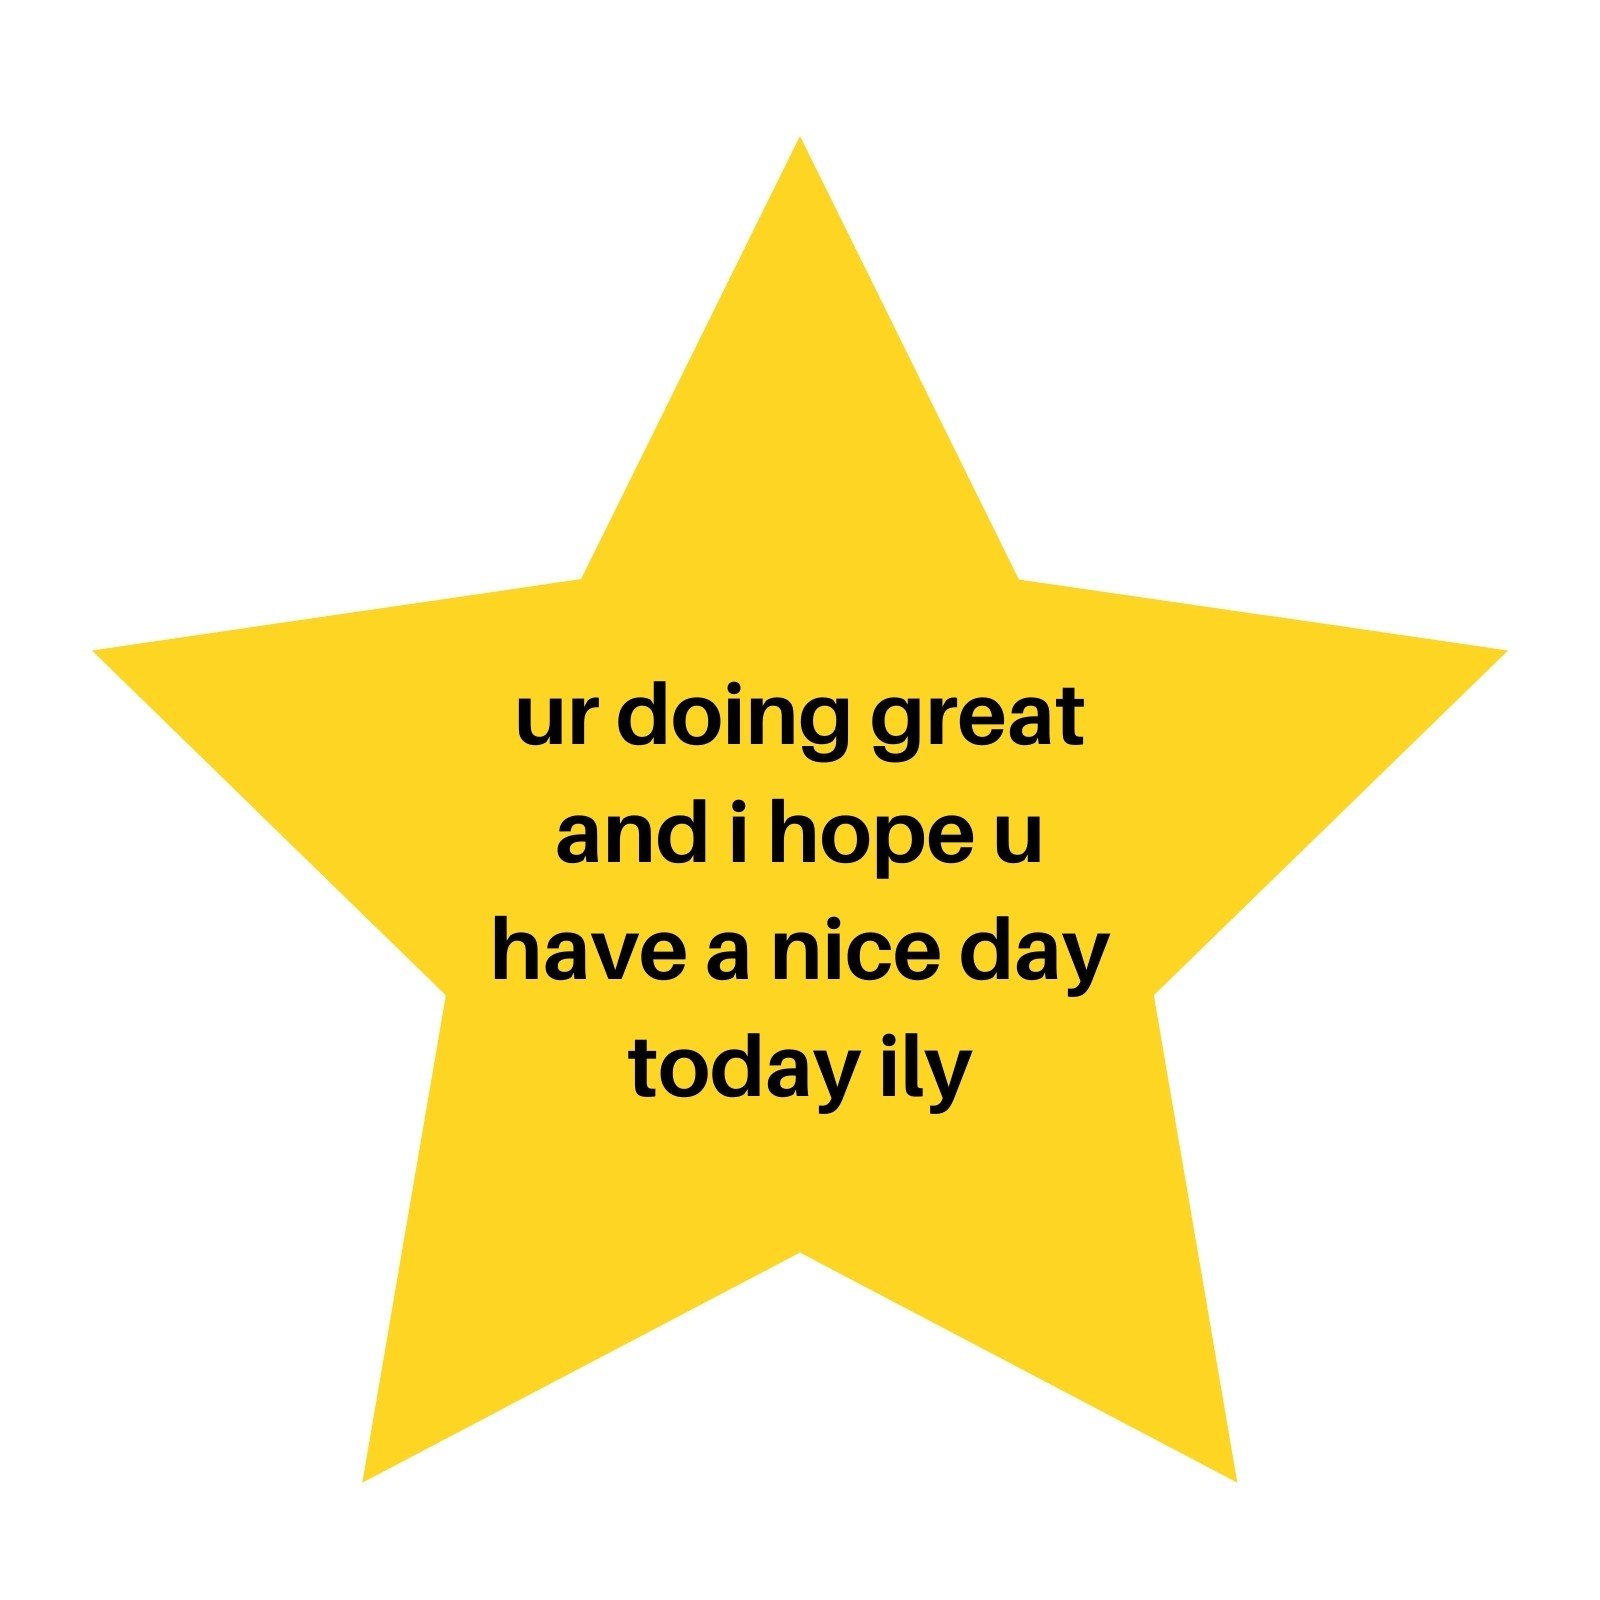 canva-yellow-star-wholesome-square-inspirational-meme-T__ZJGvud6k.jpg